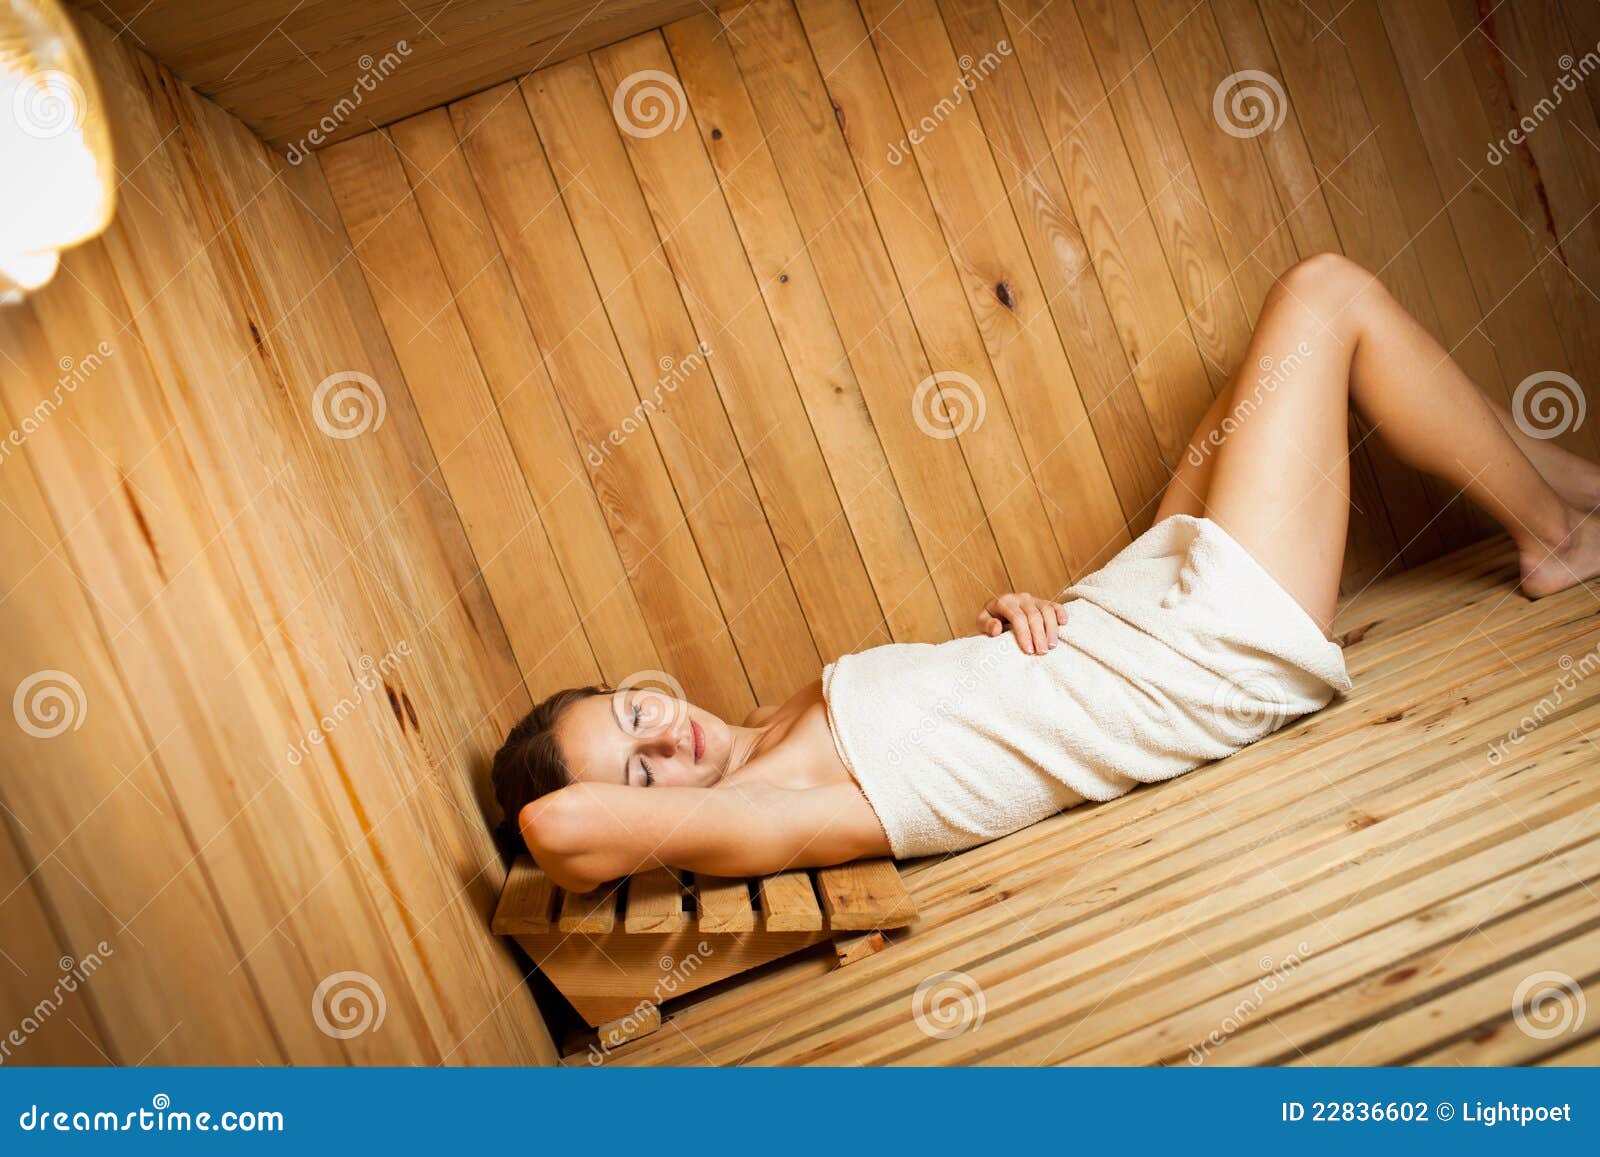 Woman relaxing in a sauna stock image. Image of sauna 